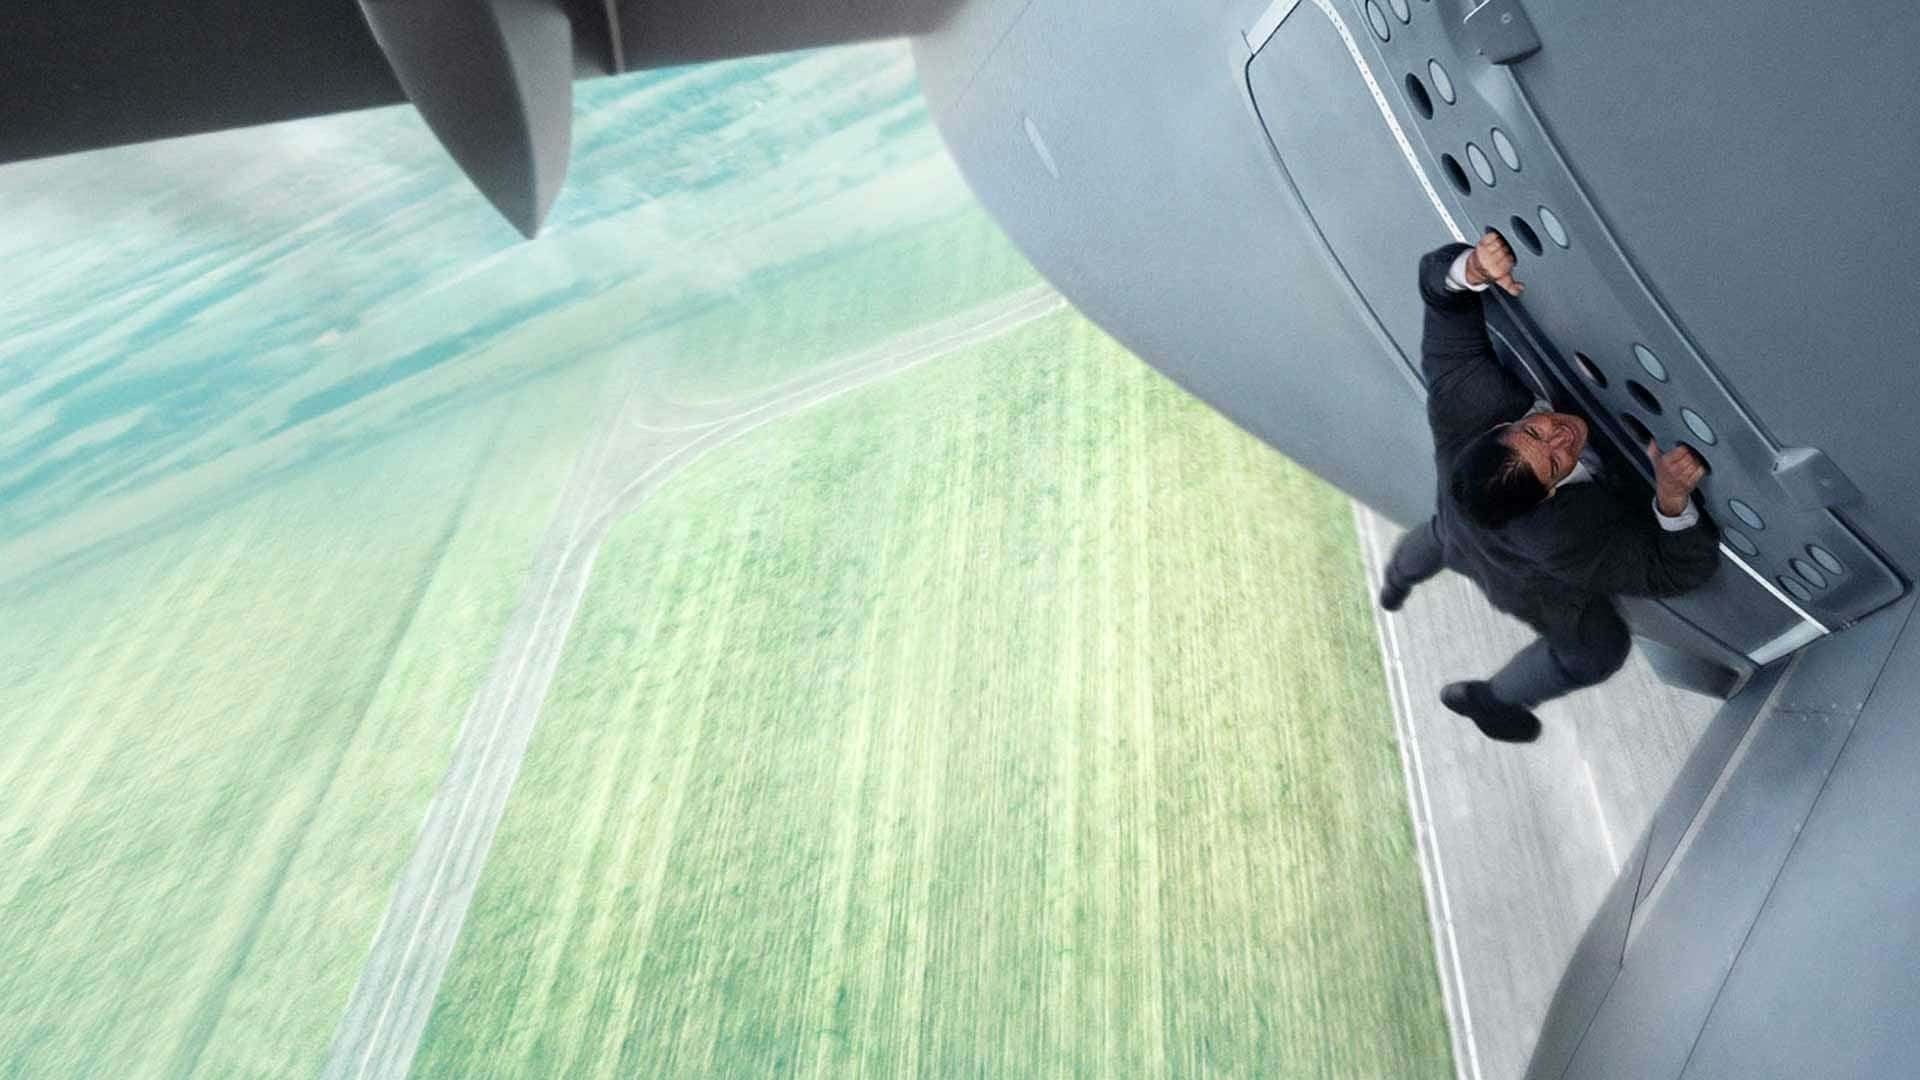 Mission: Impossible Films facts 